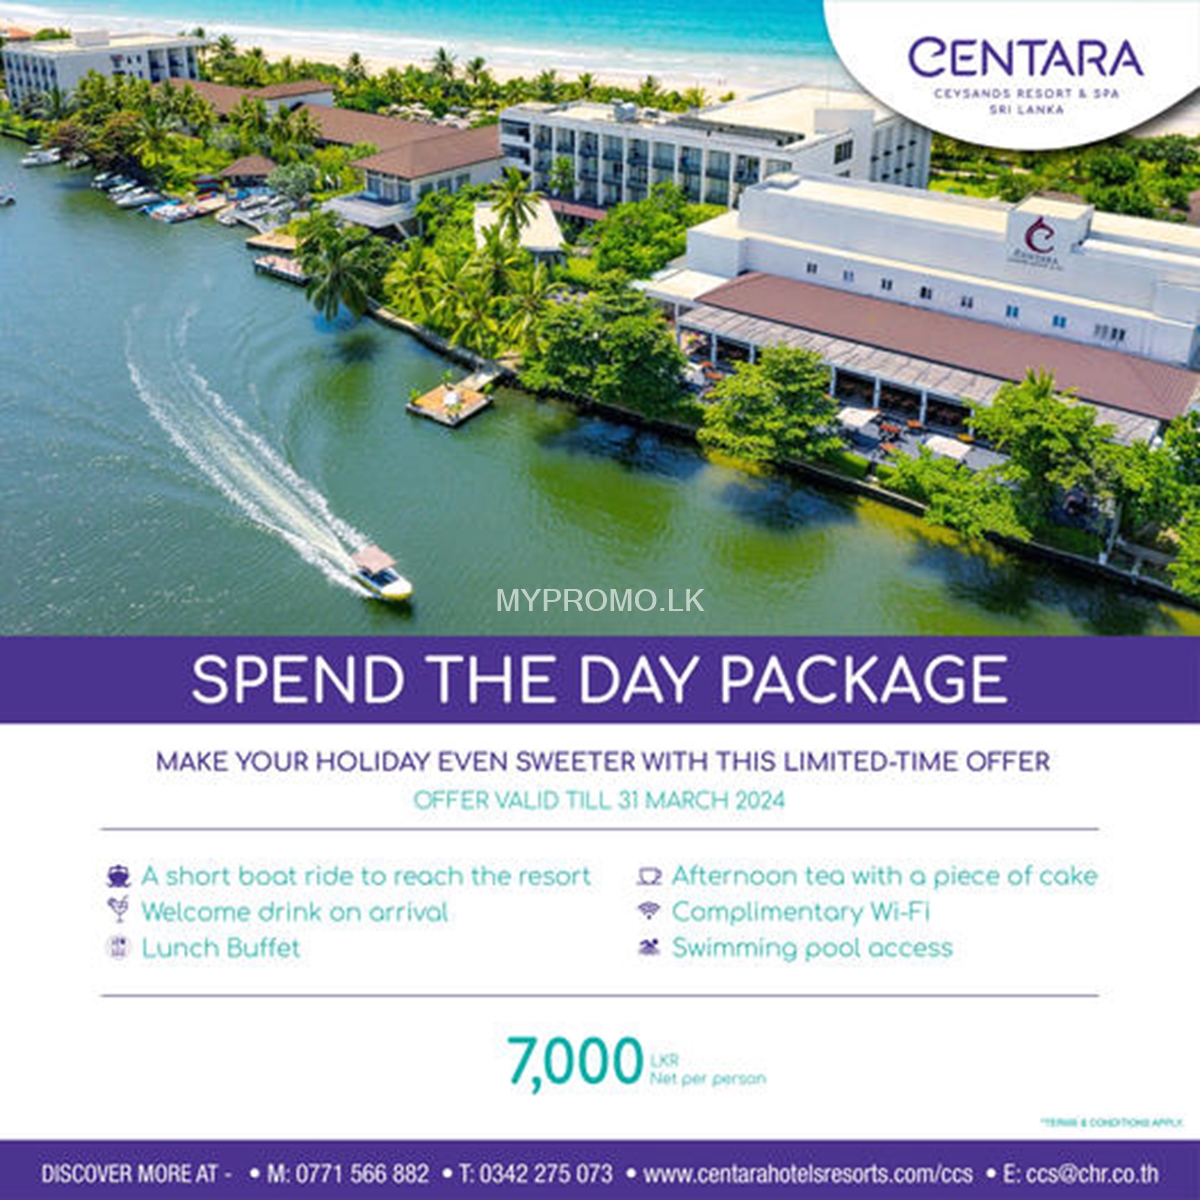 Spend the day Package at Centara Ceysands